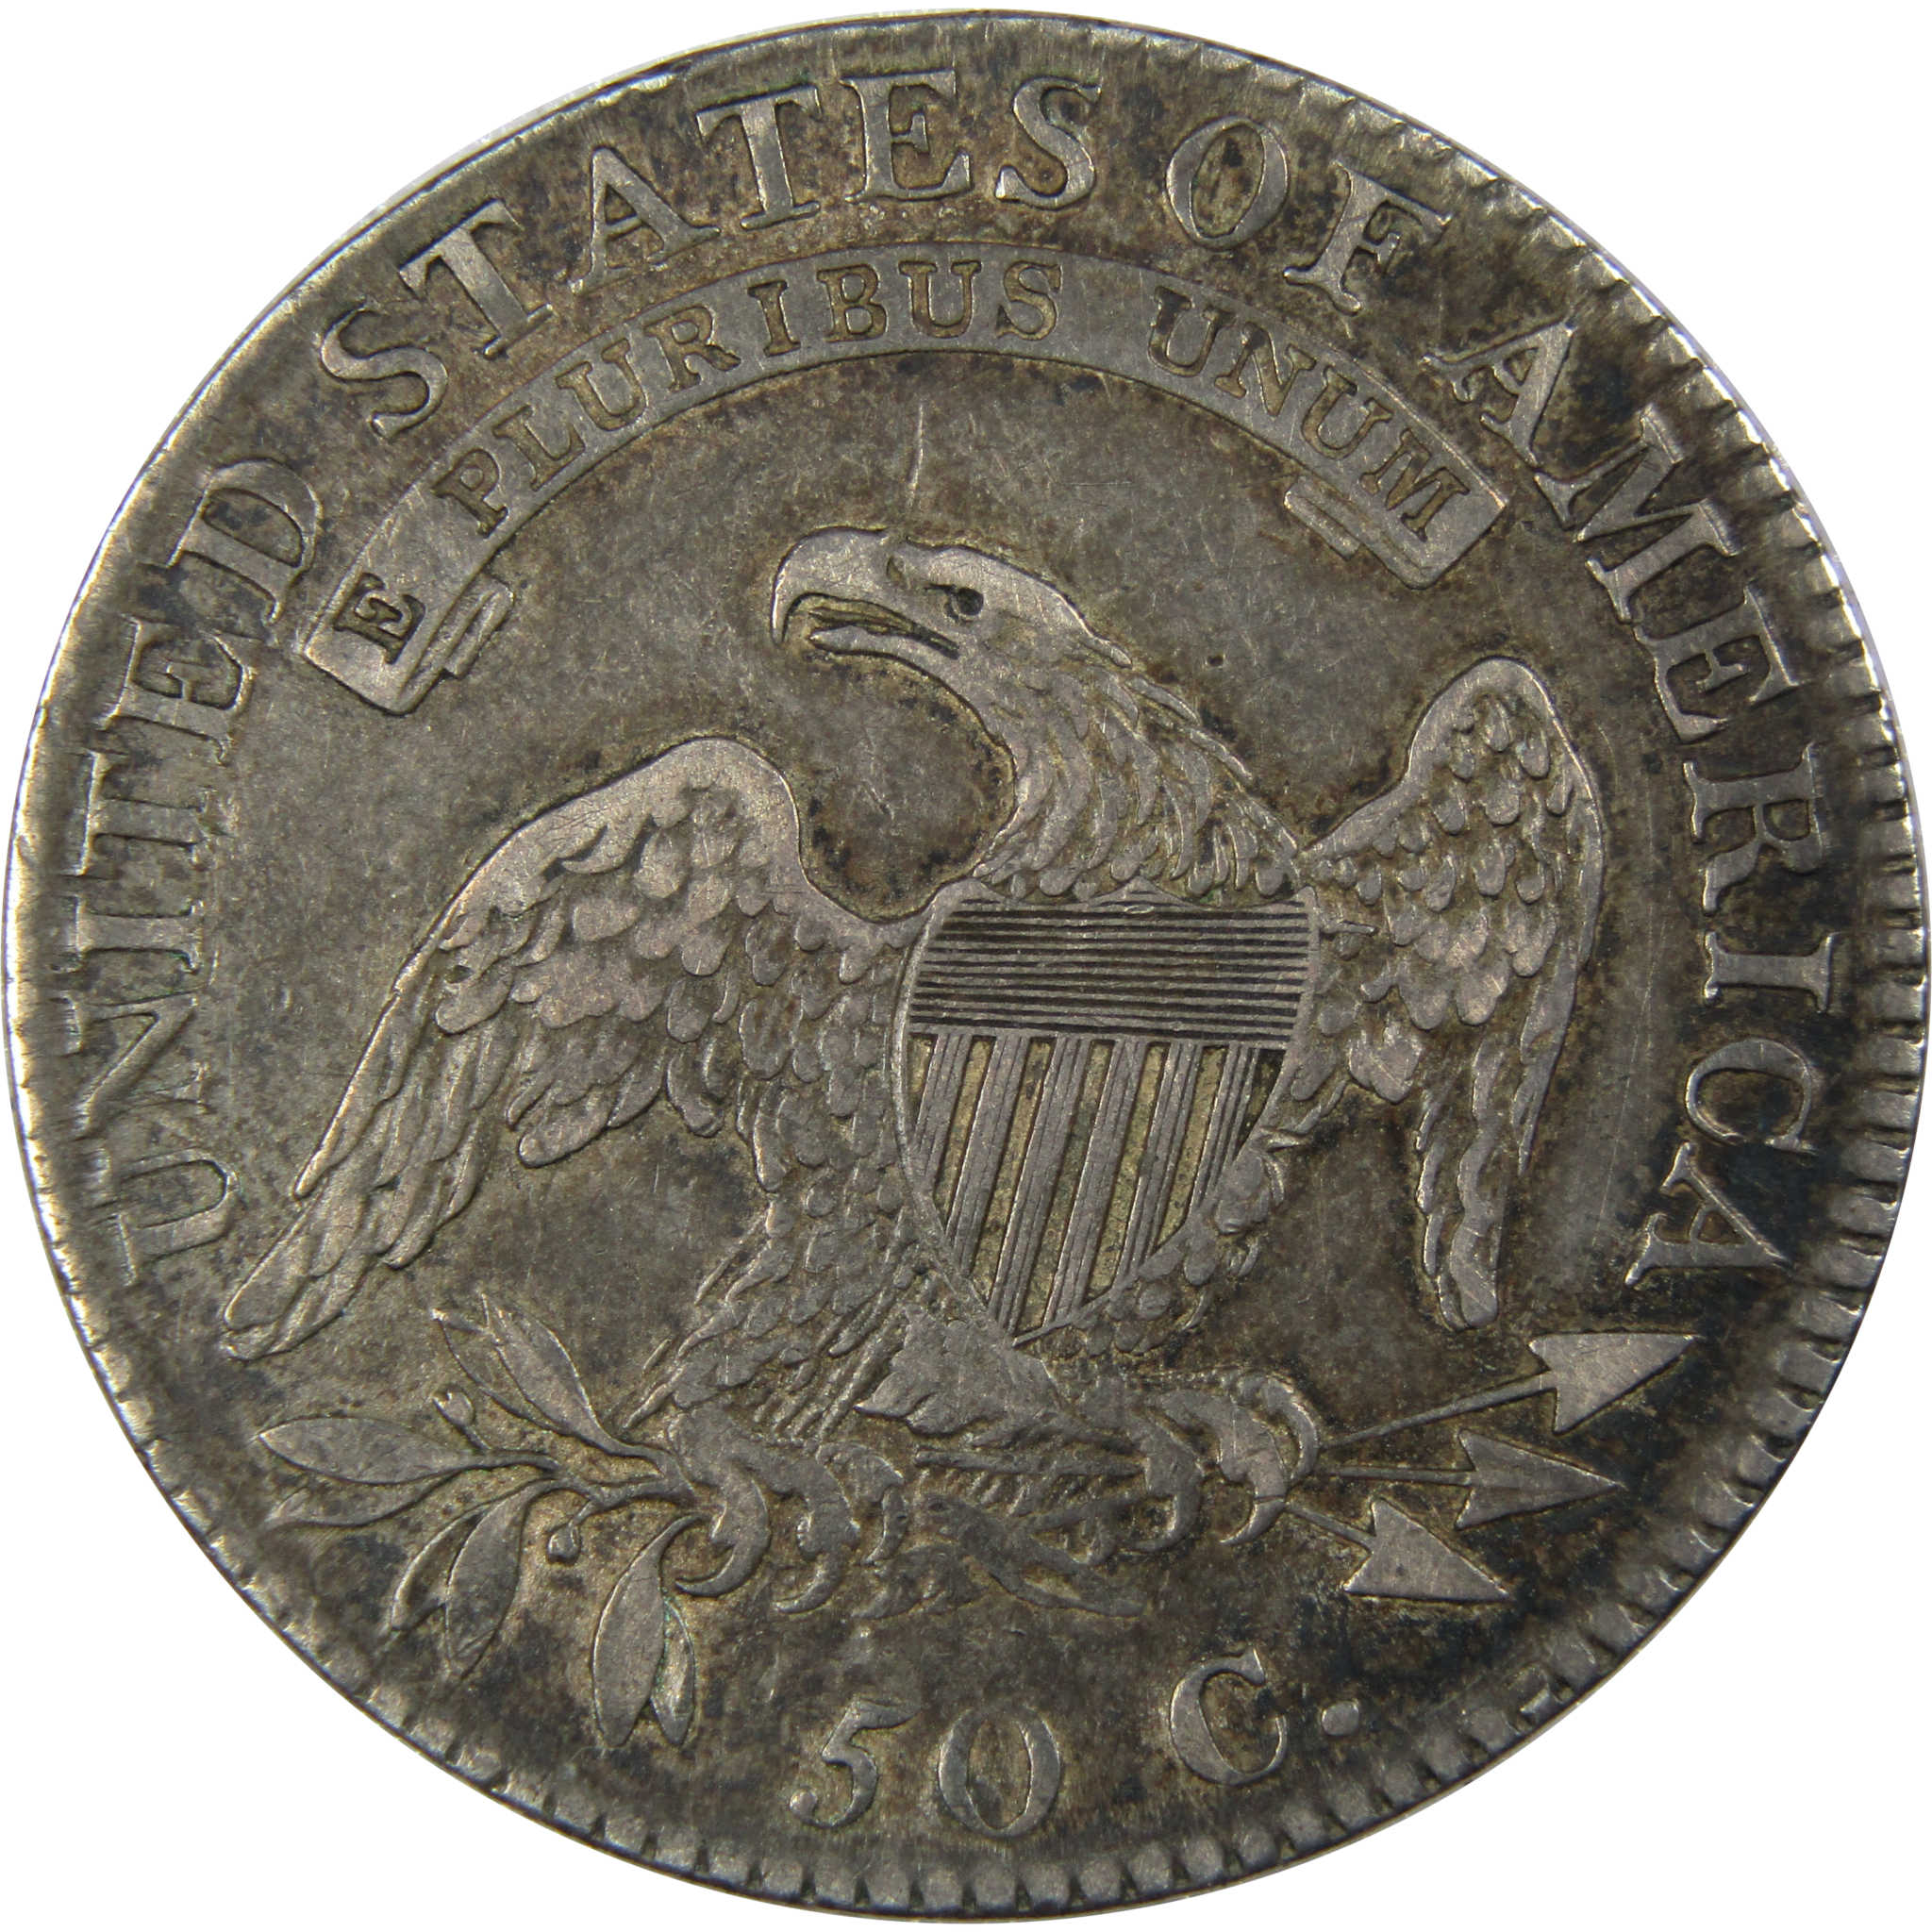 1818/7 Small 8 Capped Bust Half Dollar XF Extremely Fine SKU:IPC9825